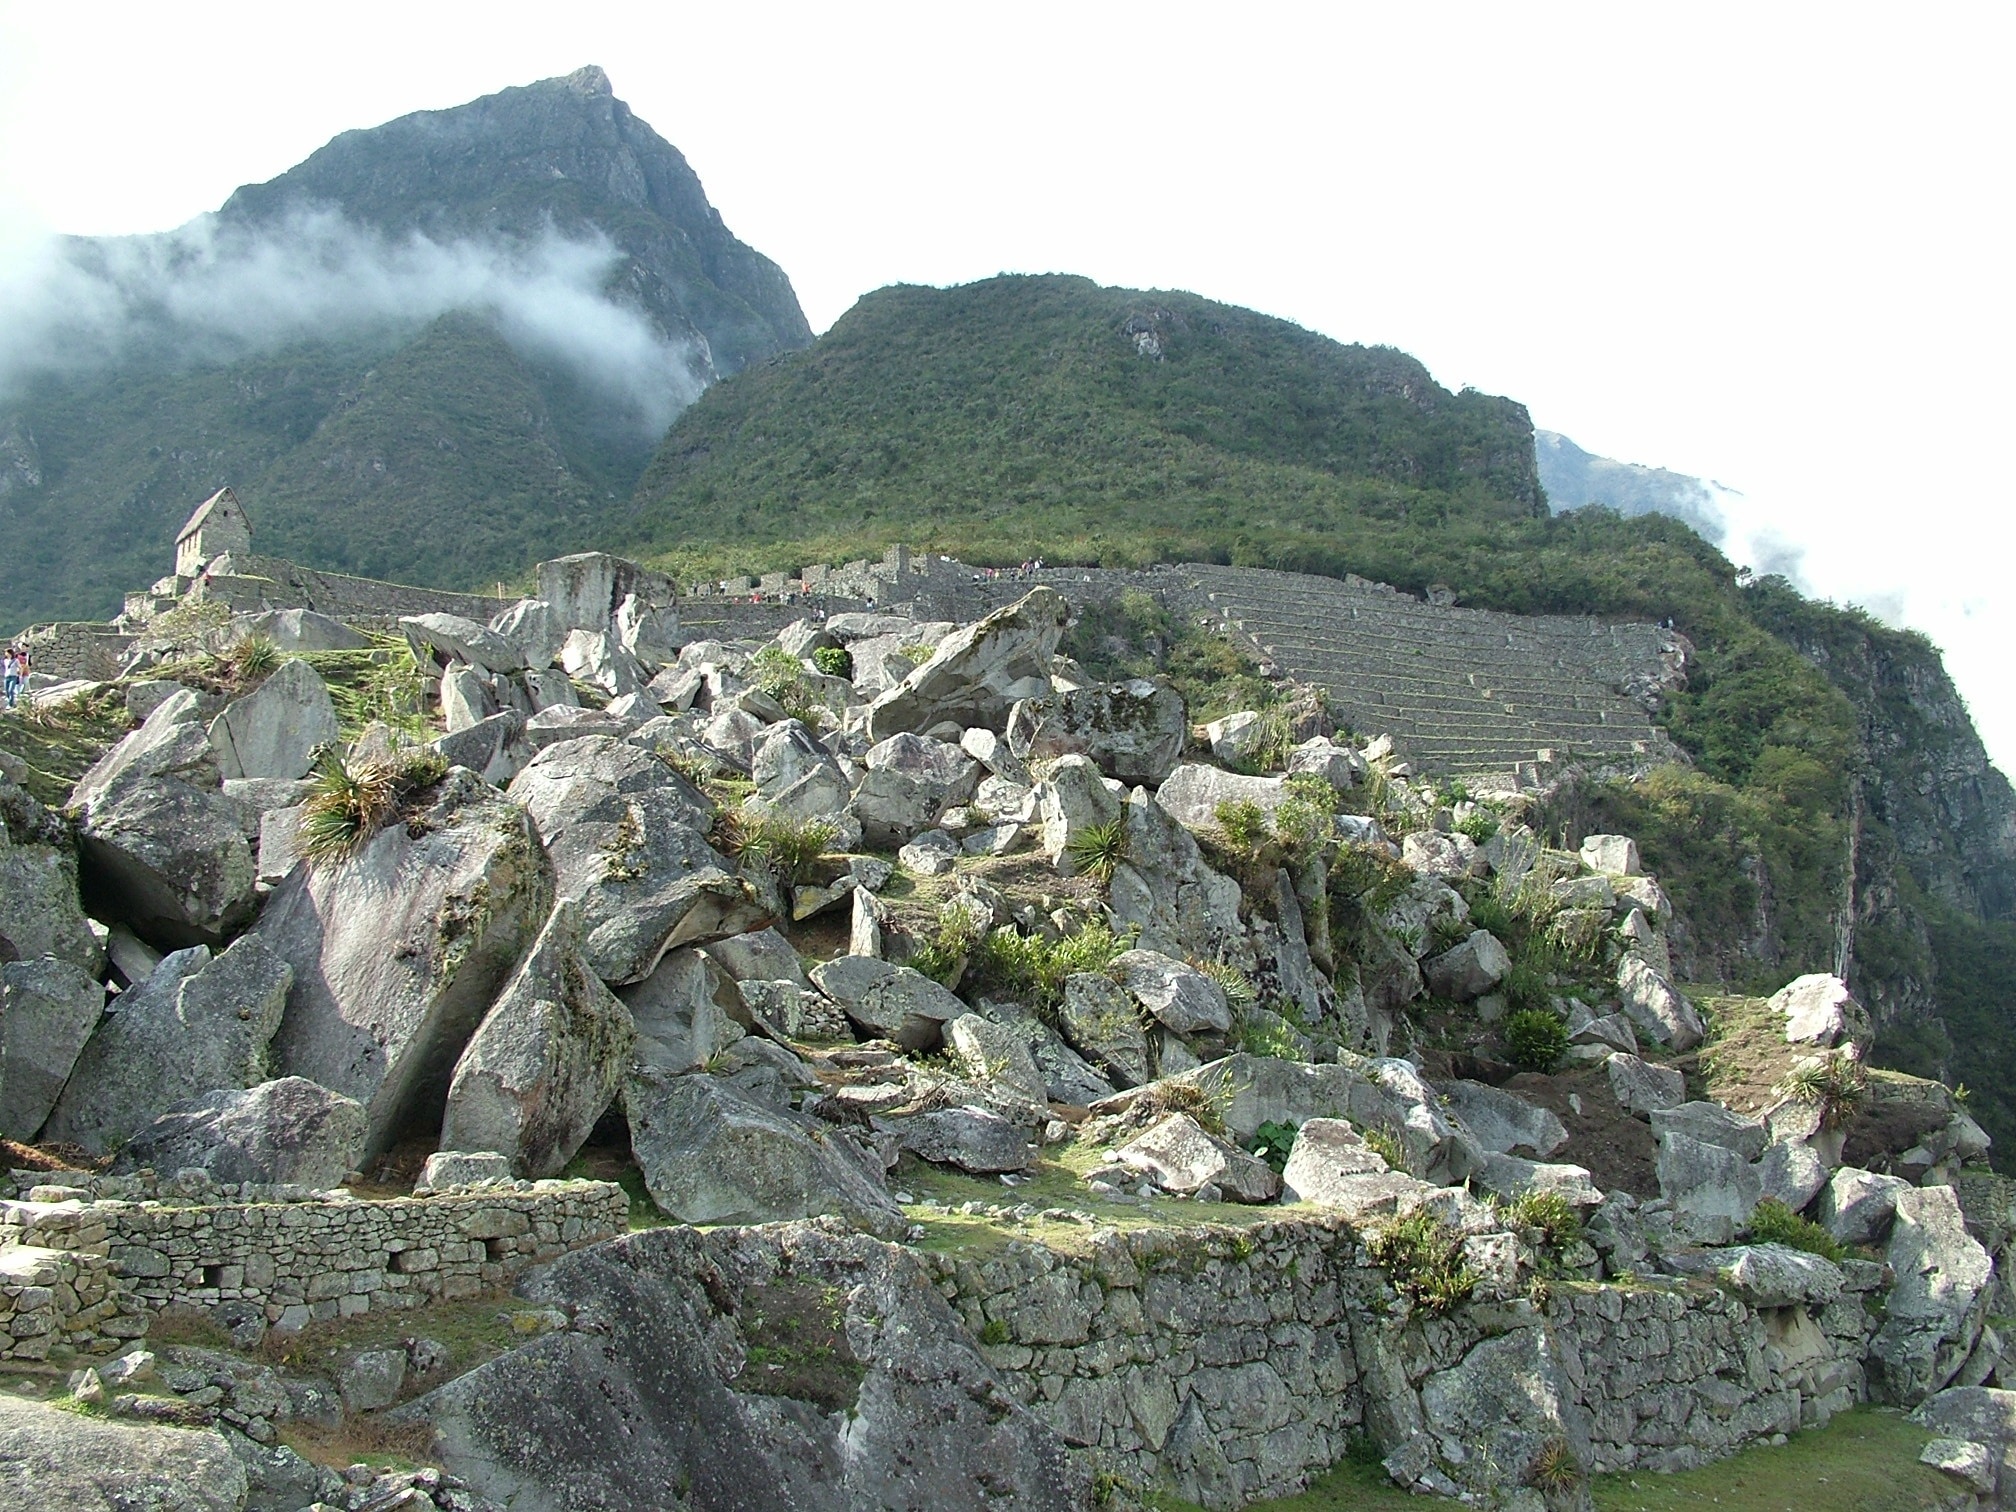 green mountain with gray rock formation